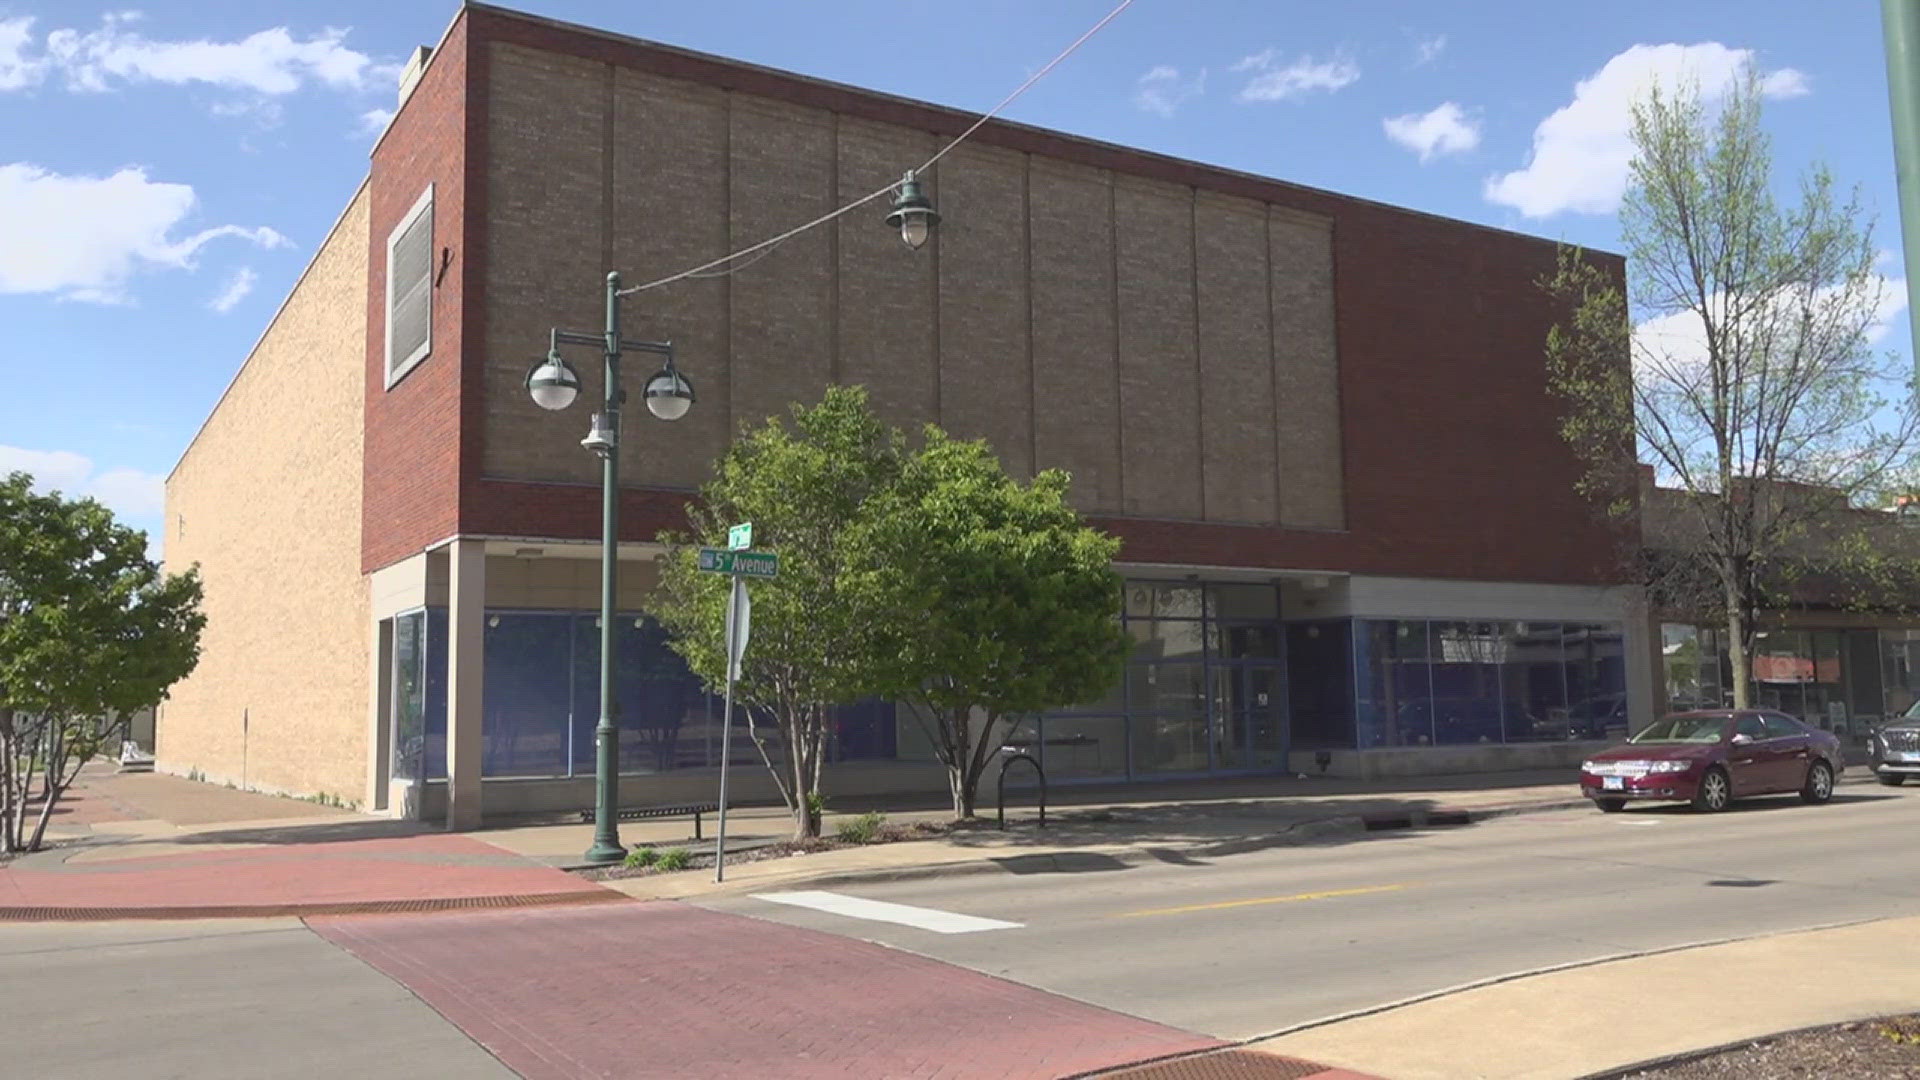 The $6.8 million project will turn the old JCPenney building on Fifth Avenue into 32 new apartments, including a daycare on the ground floor.